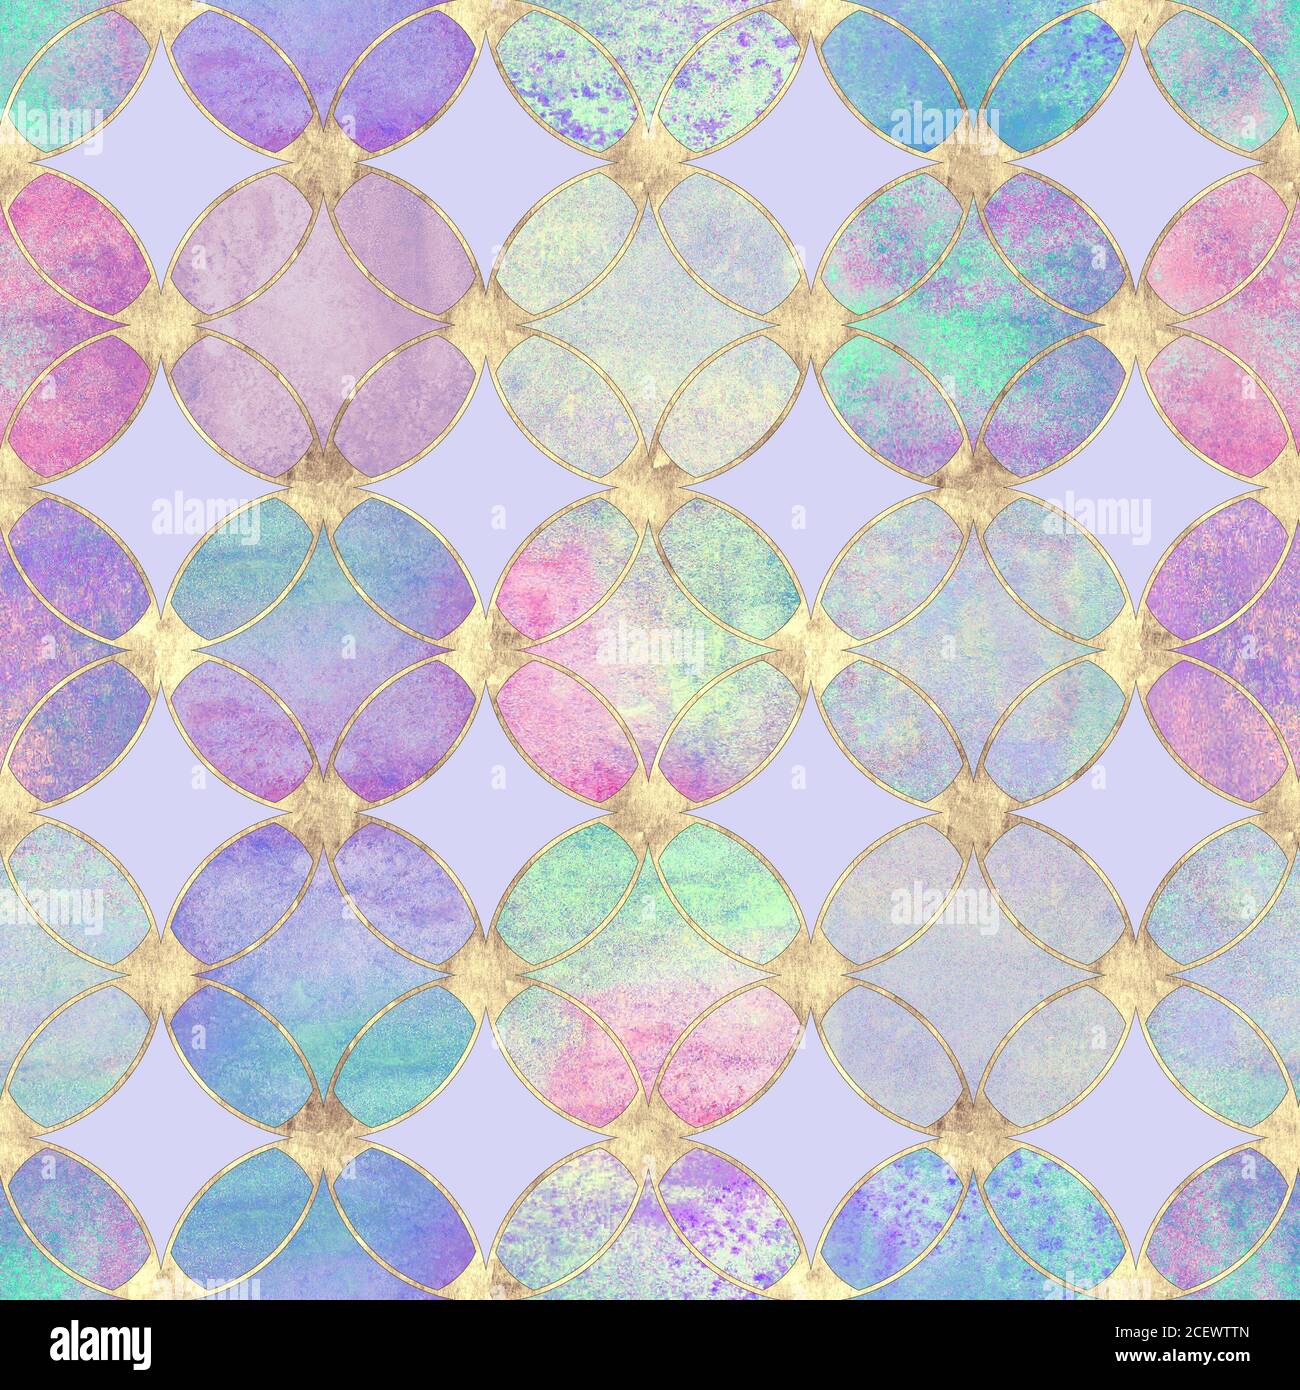 Seamless watercolour colorful gold glitter abstract texture. Watercolor hand drawn grunge lavender background with overlapping circles and golden cont Stock Photo